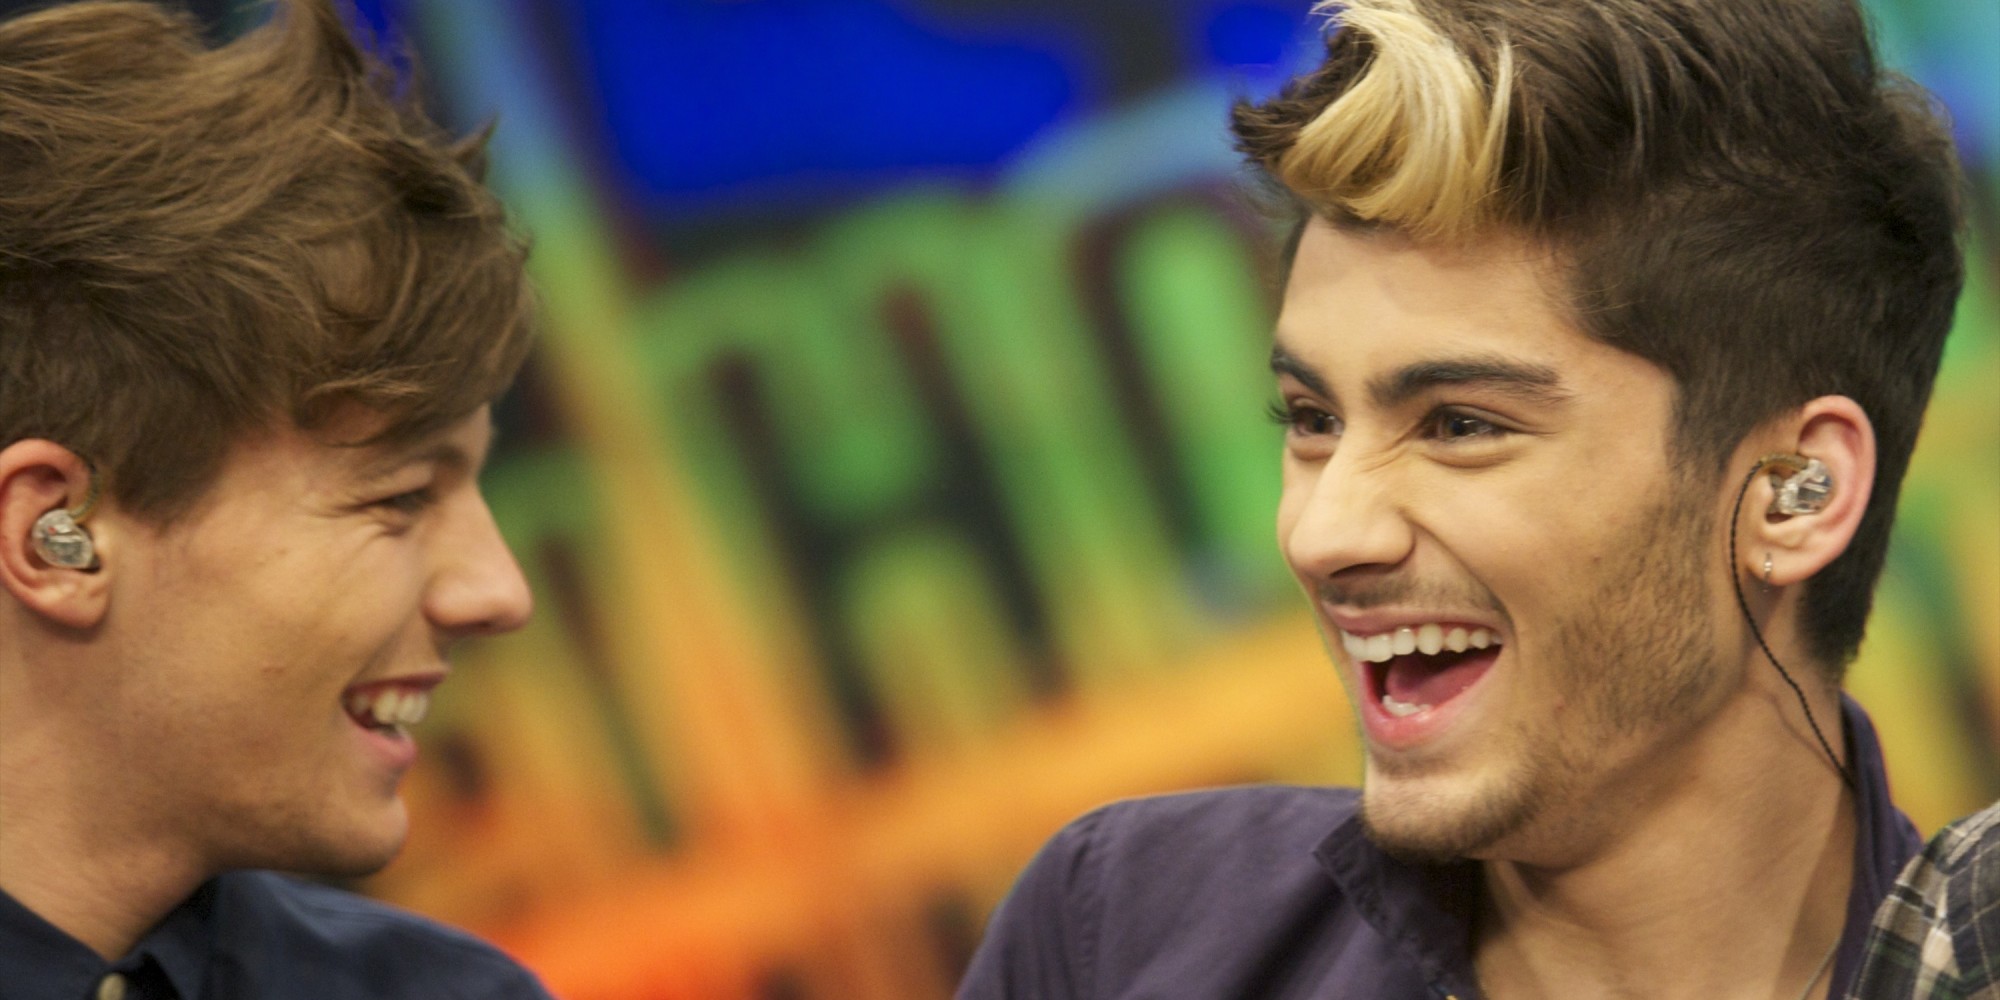 Zayn Malik And Louis Tomlinson Are Beefing On Twitter (UPDATE) | HuffPost